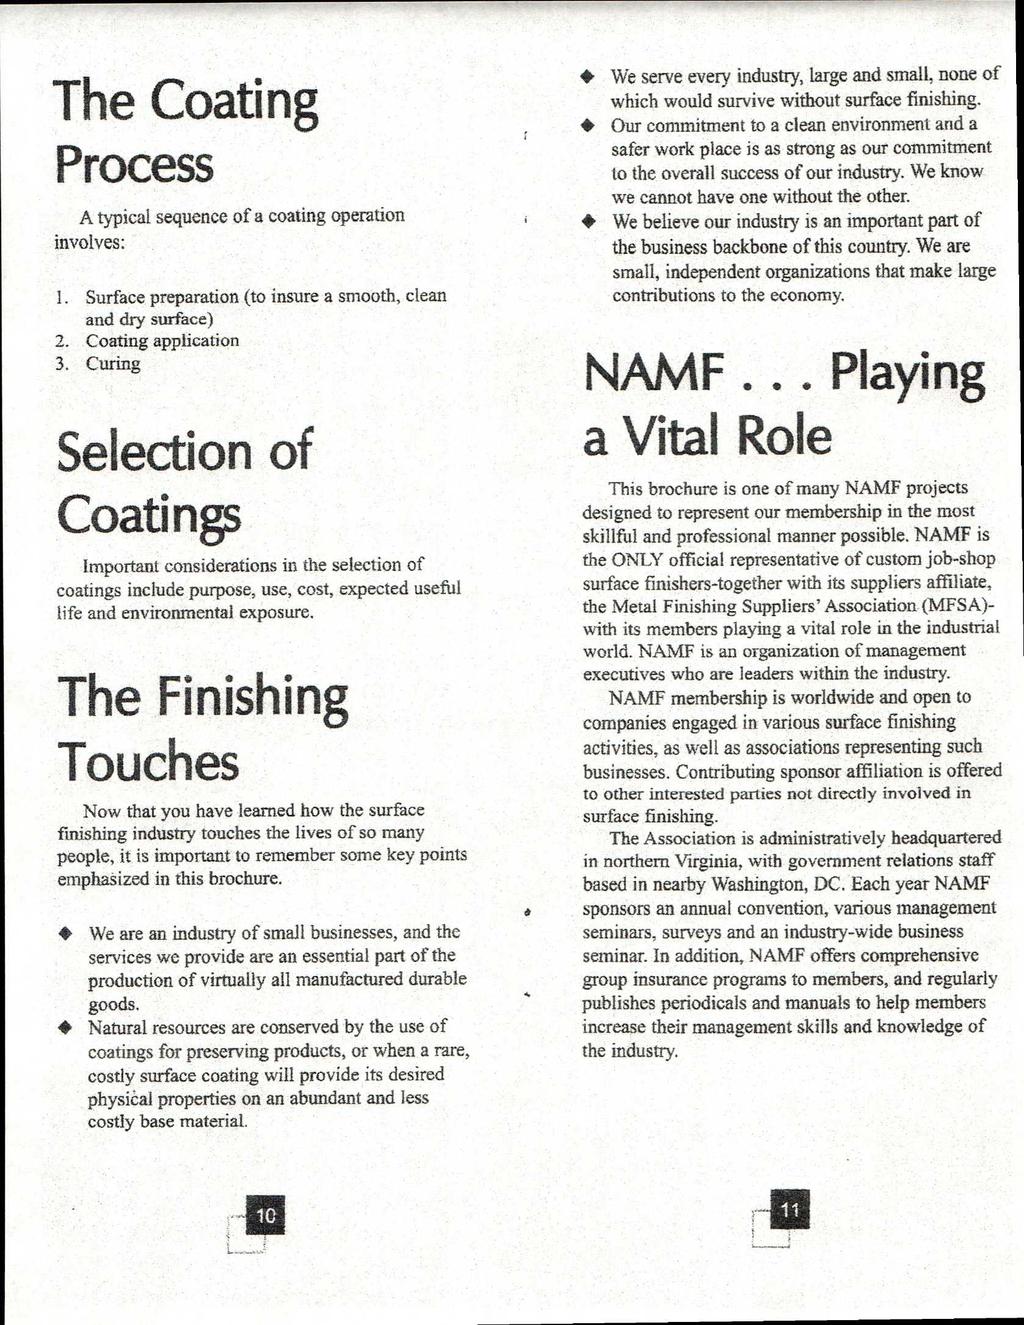 The Coating Process A typical sequence of a coating operation involves: I. Surface preparation (to insure a smooth, clean and dry surface) 2. Coating application 3.